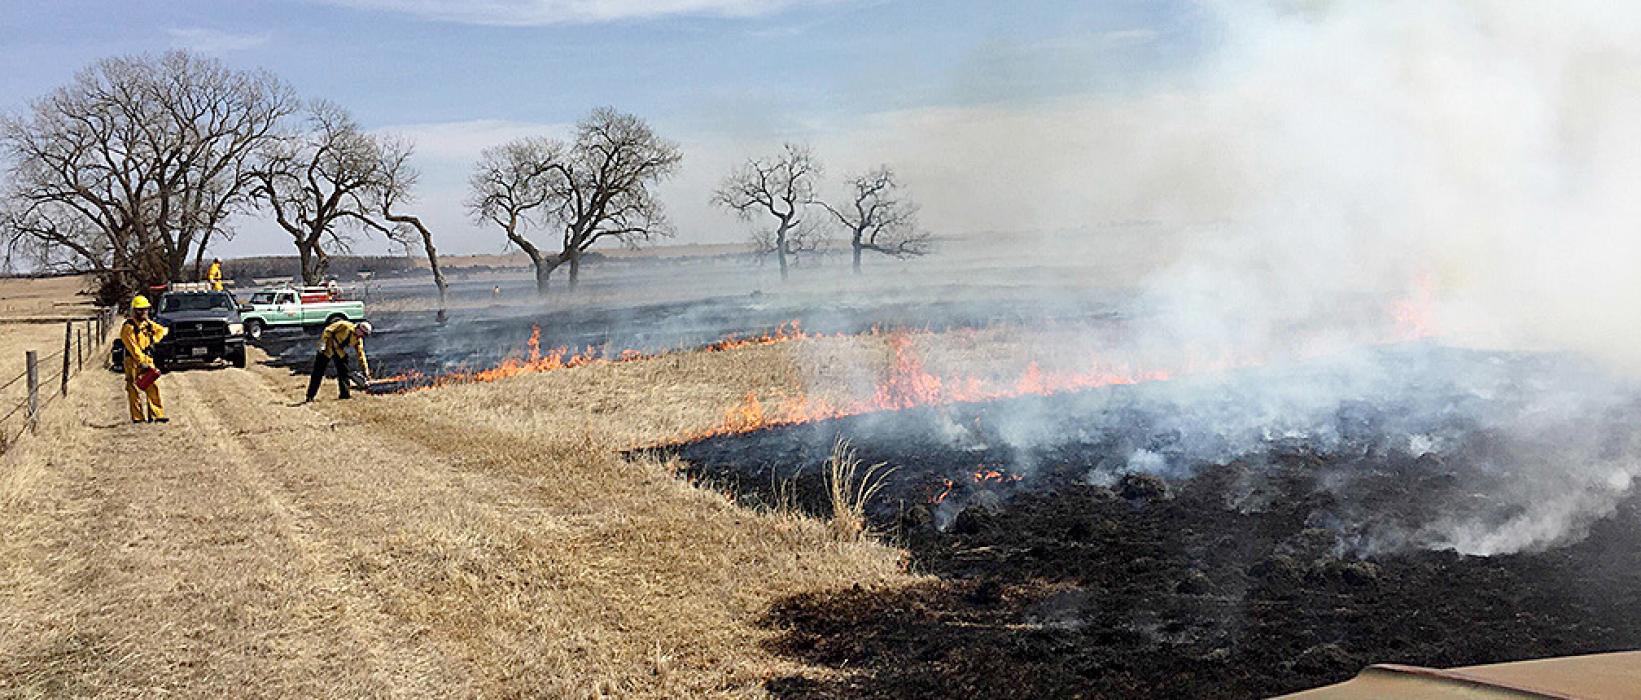 A prescribed fire crew lights off of a mowed control line, while others monitor in vehicles carrying water pumps and hoses. The mowed control line can be easily defended with tools and the vehicles carrying water on the burn. There is a smooth, clean line of black vegetation along the boundary of the burn.